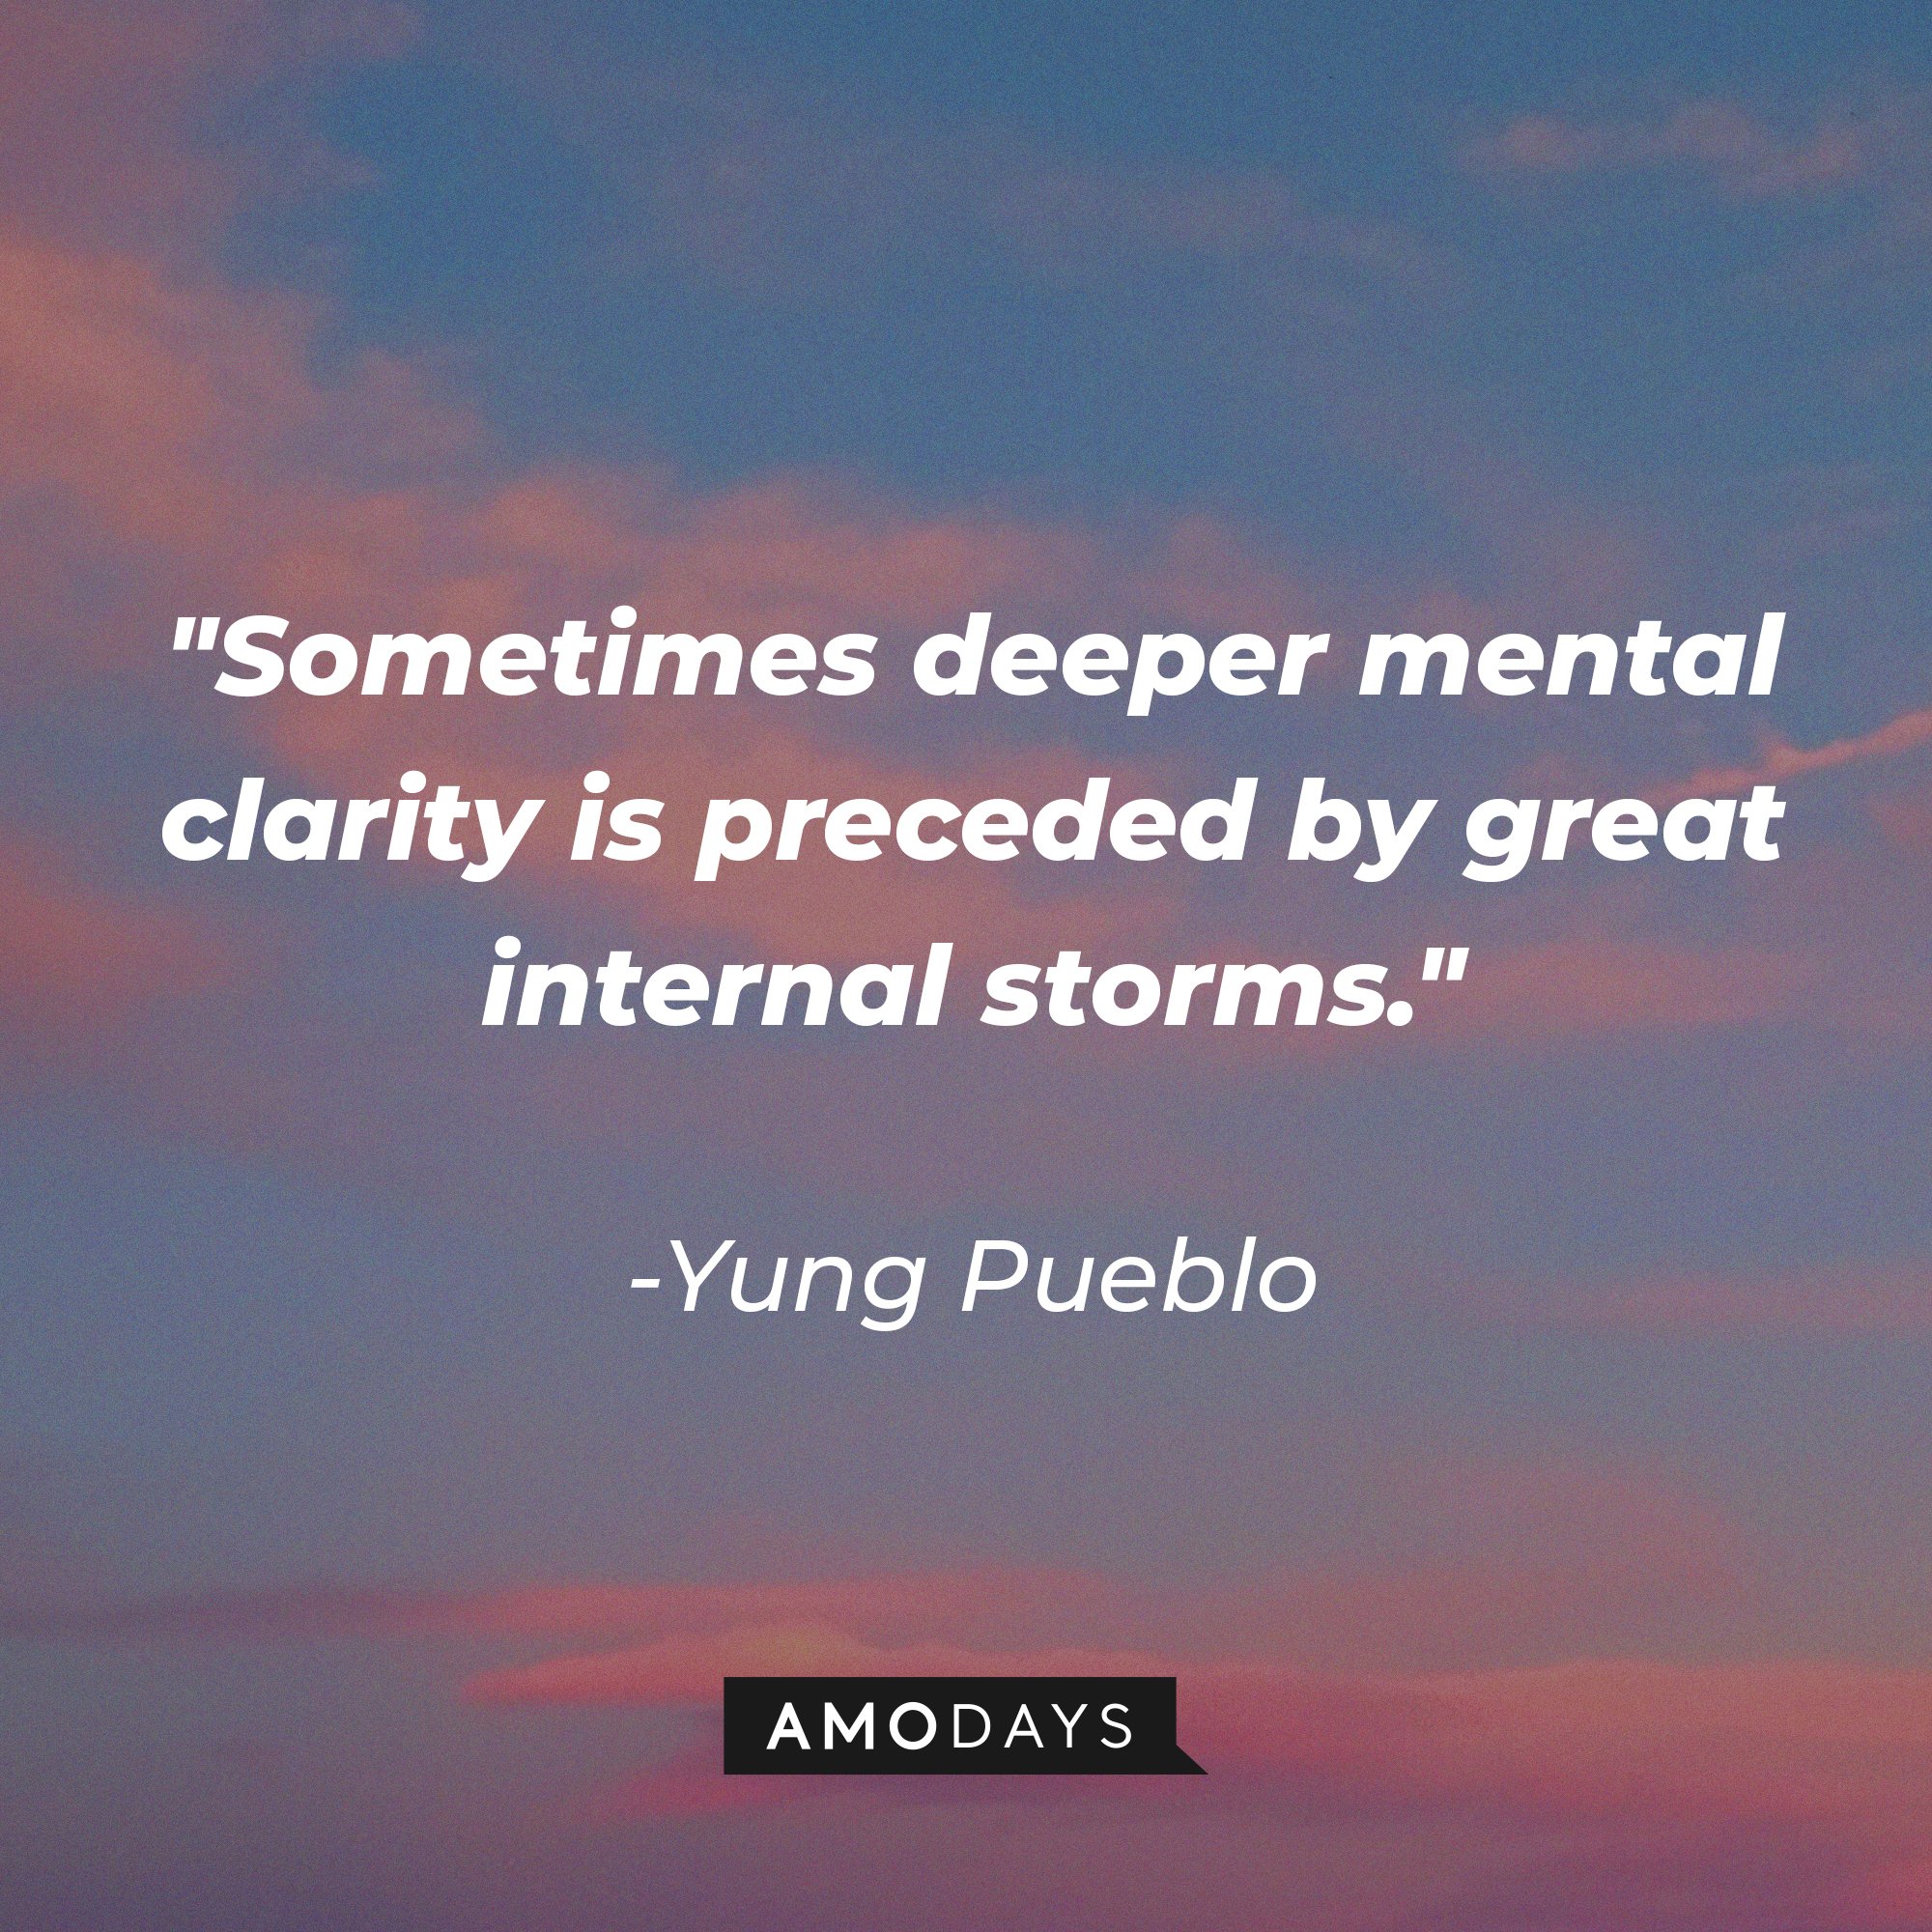 Yung Pueblo's quote "Sometimes deeper mental clarity is preceded by great internal storms." | Source: Unsplash.com